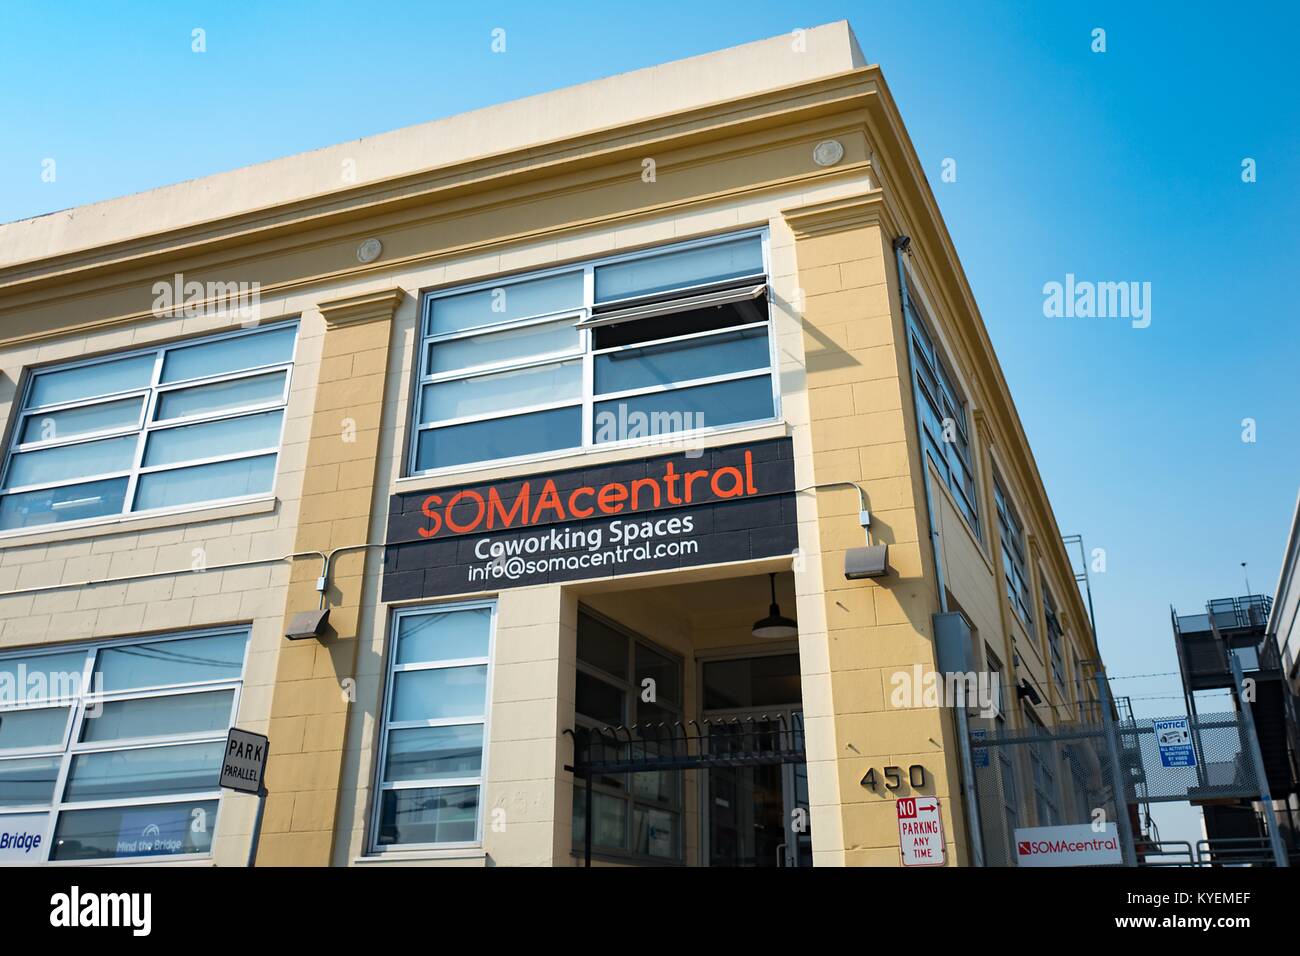 Sign for the SOMACentral co-working space in the South of Market (SoMa) neighborhood of San Francisco, California, October 13, 2017. SoMa is known for having one of the highest concentrations of technology companies and startups of any region worldwide. () Stock Photo